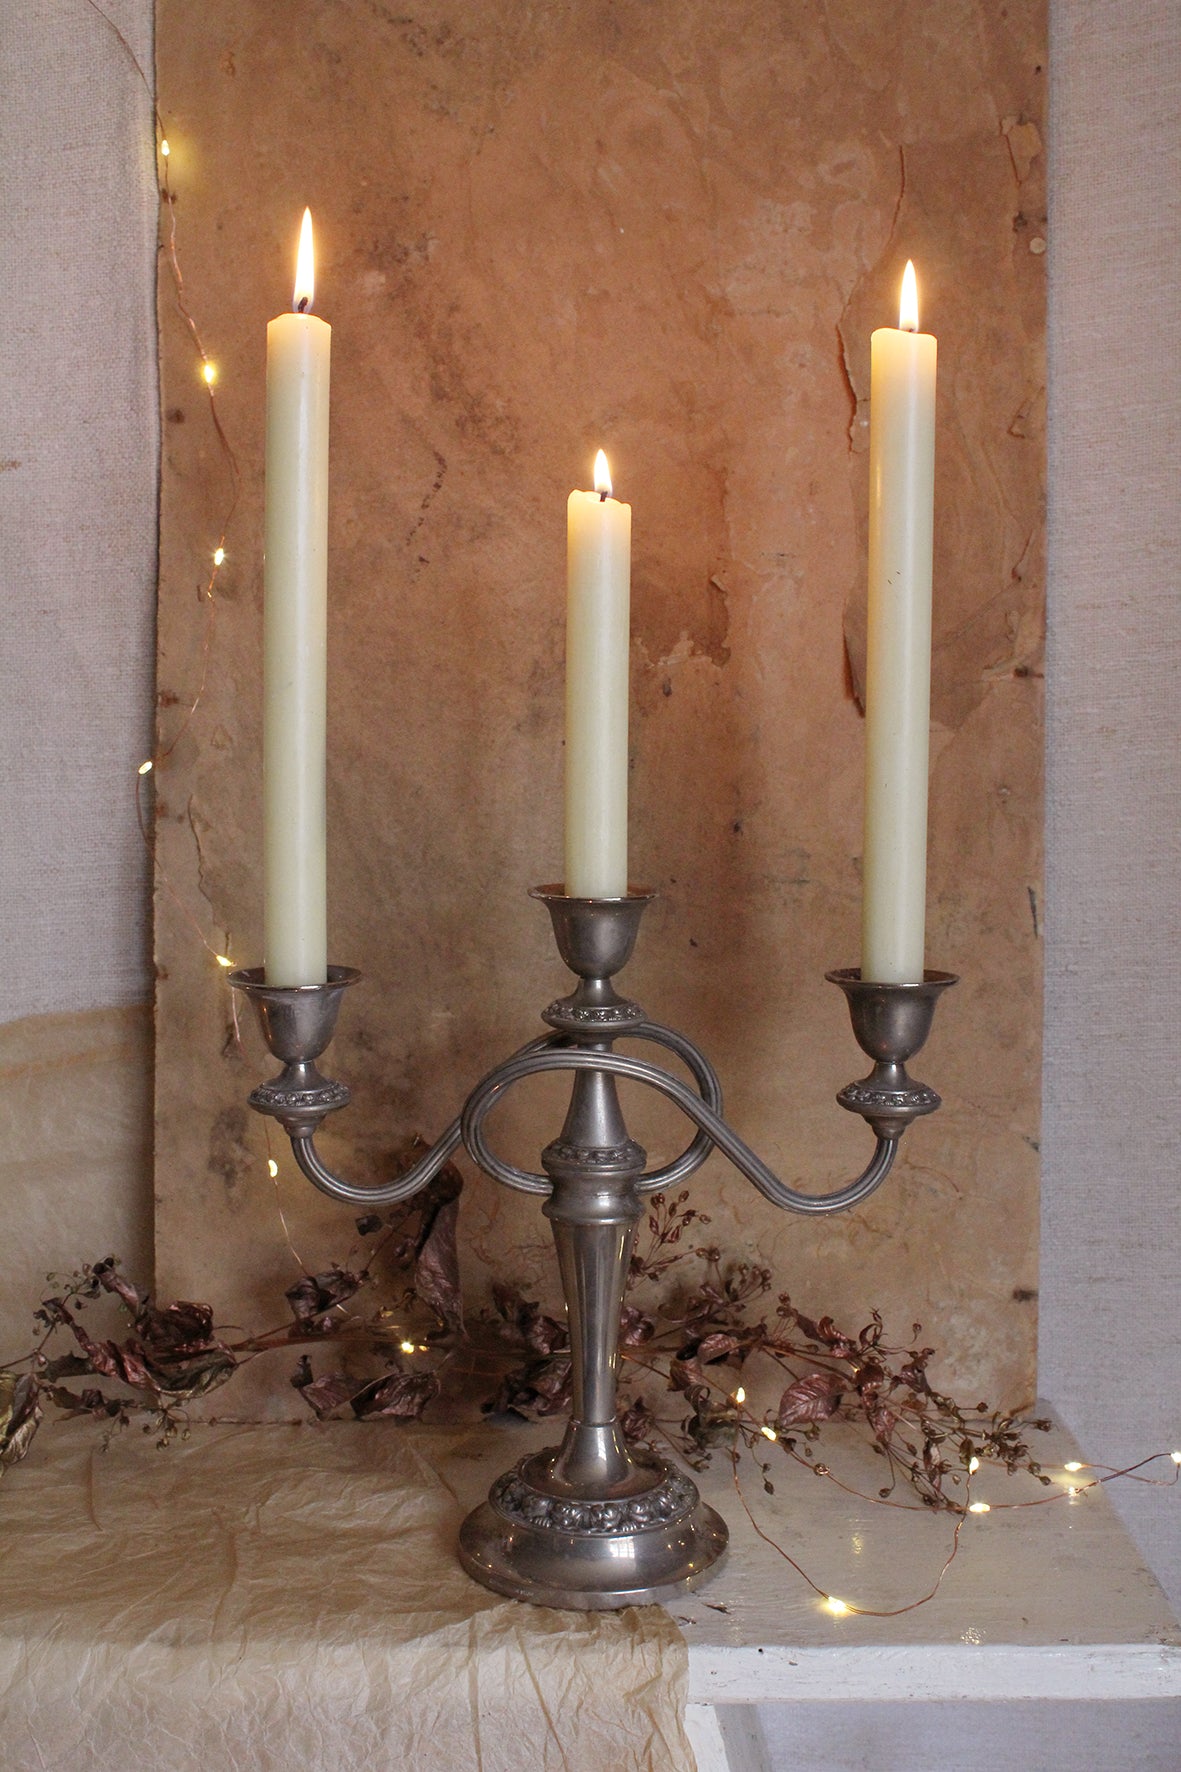 A Very Beautiful Early Plate Candelabra & Candles - Patina